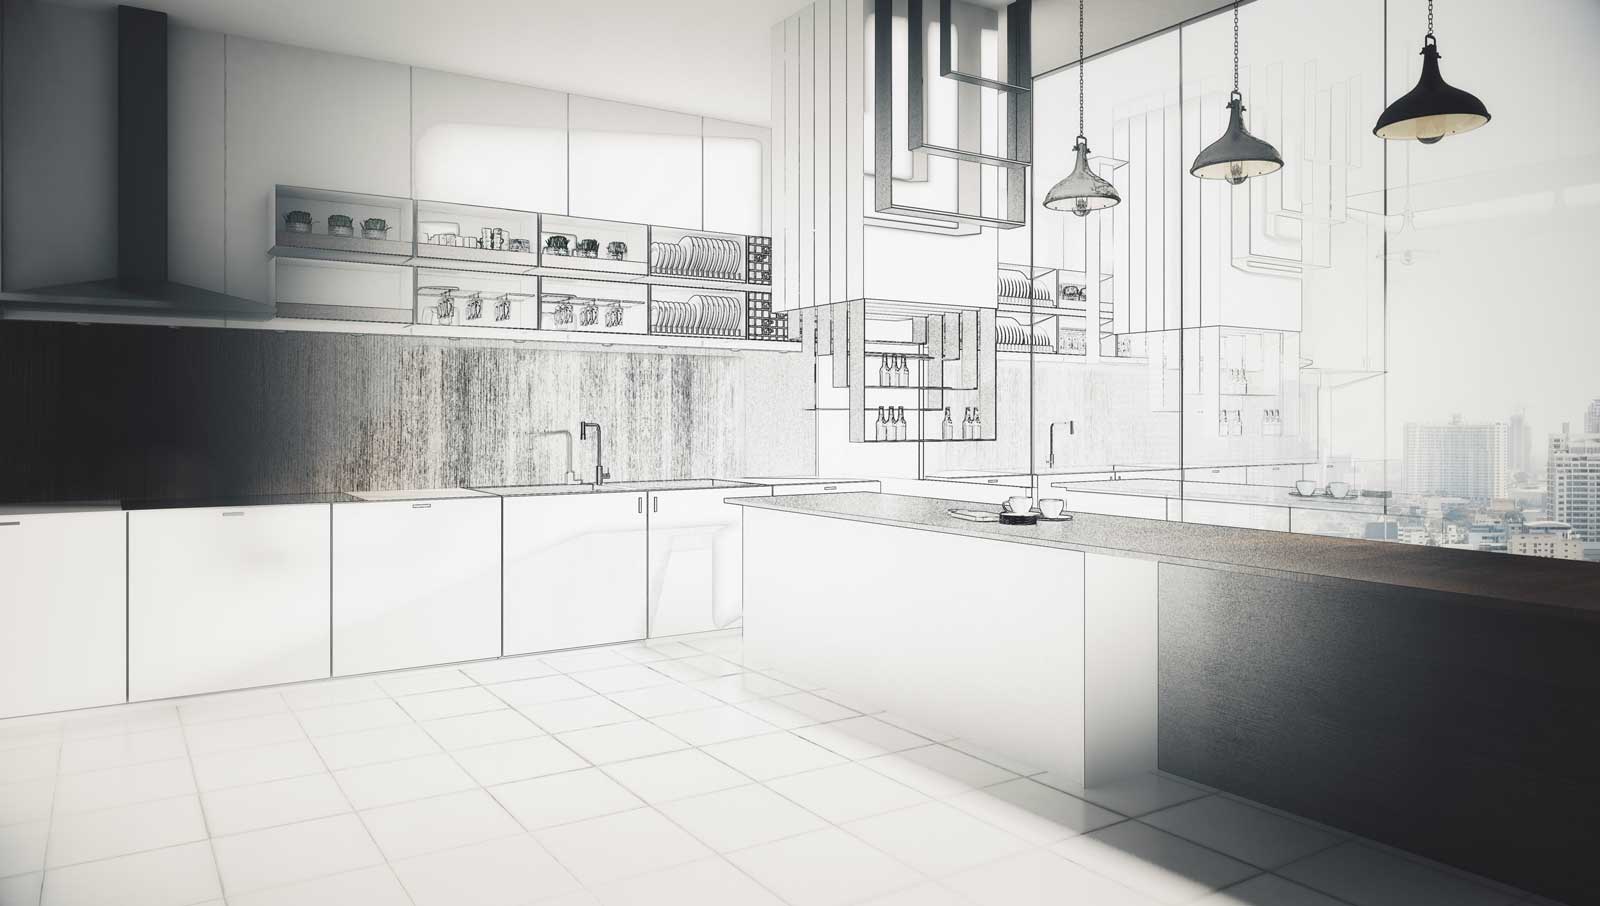 Abstract unfinished kitchen interior drawing. Engineering and project concept.